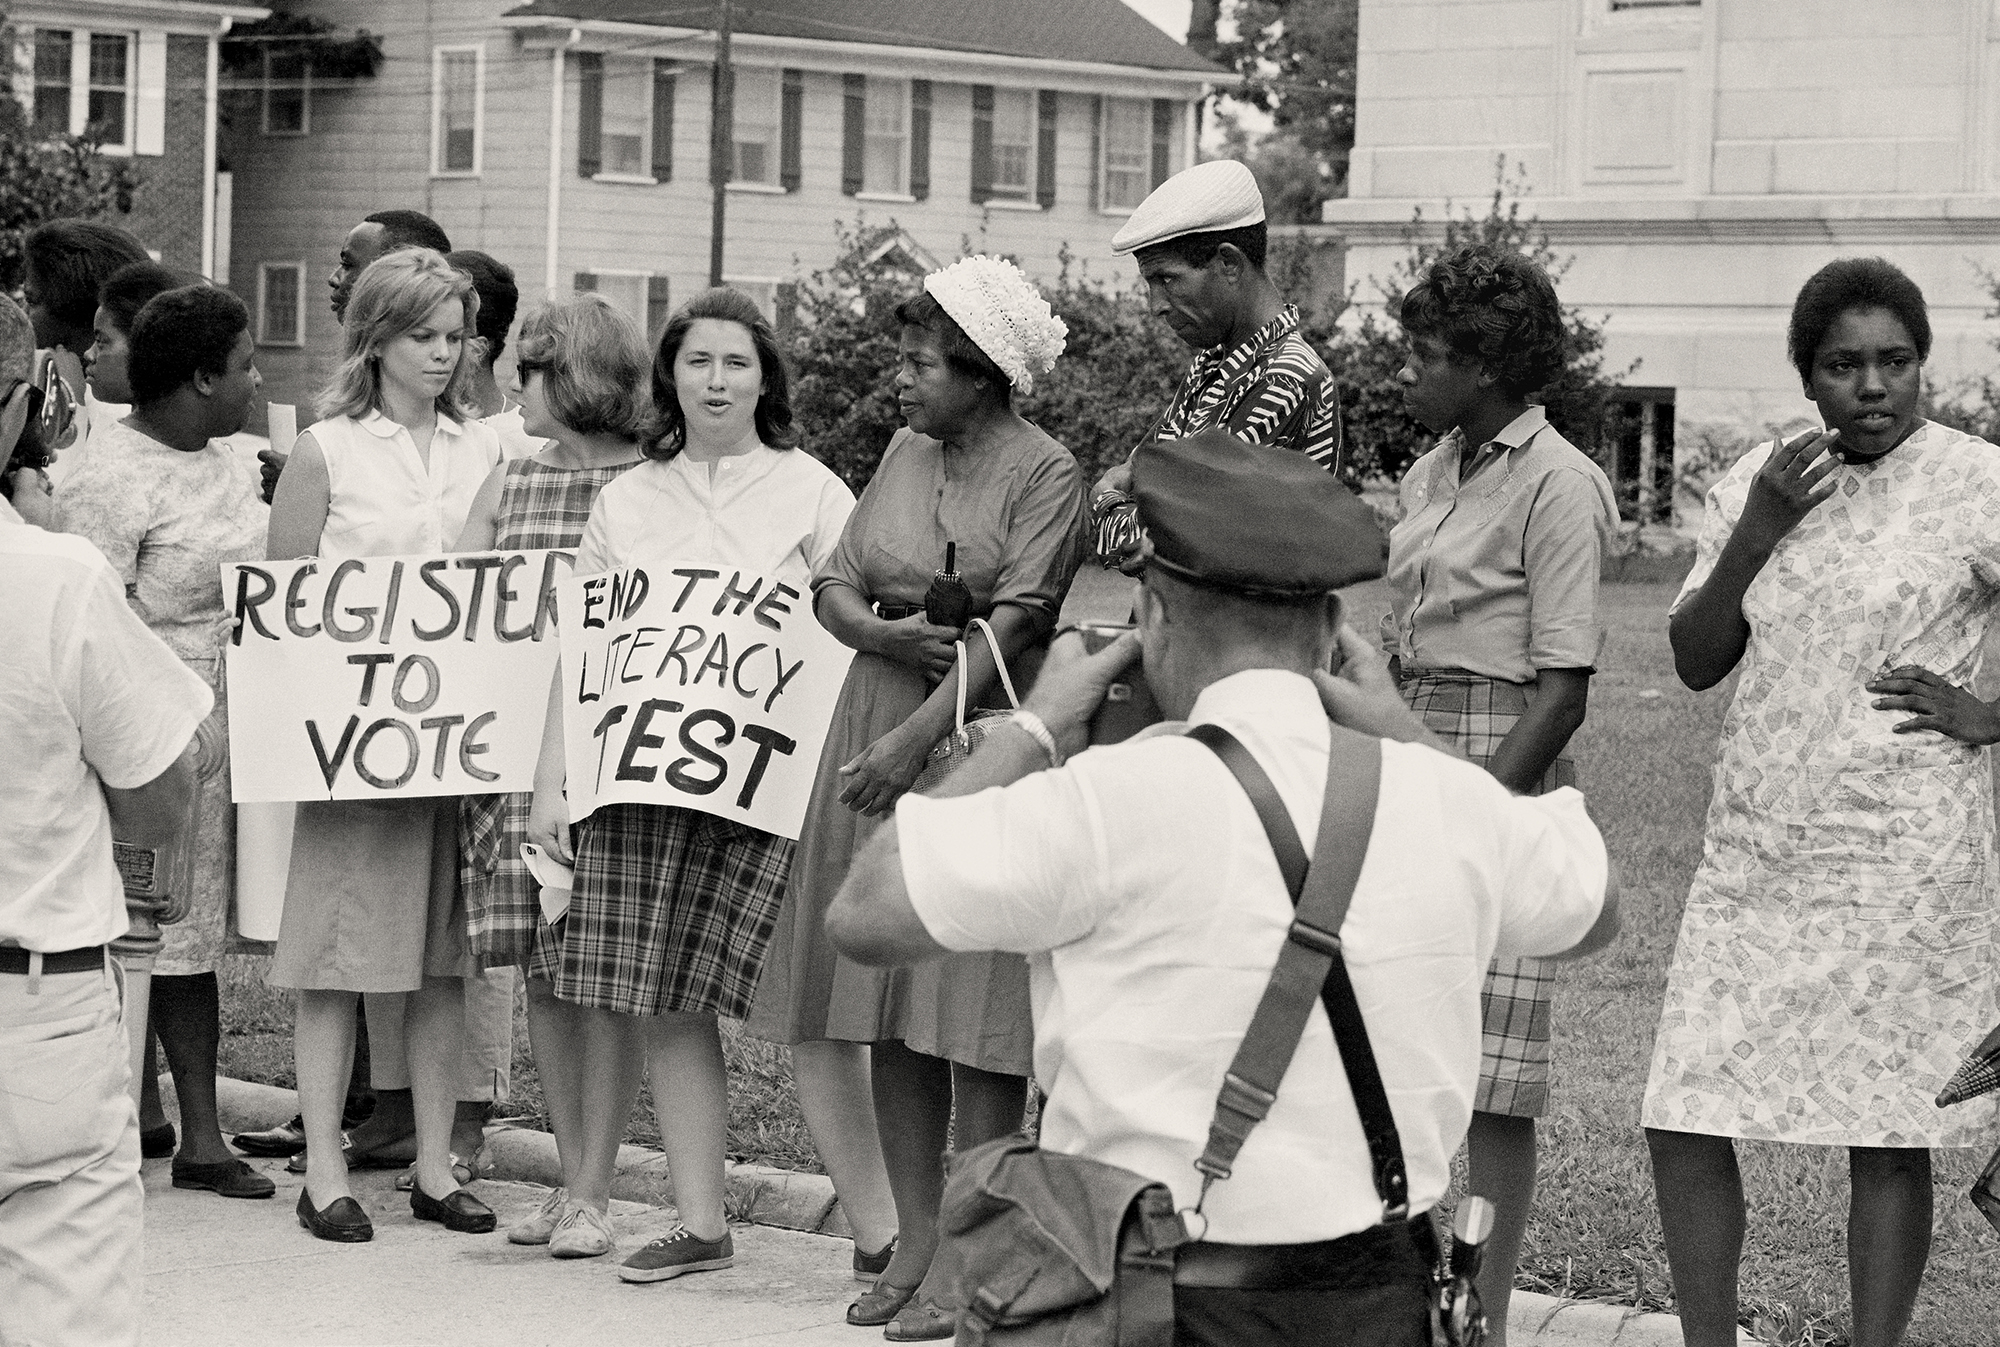 Civil Rights Workers Used Non-violent Demonstrations to Support Black Citizens Trying to Register, 1964. Photograph by Ted Polumbaum. Just 2 percent of eligible Black voters in Leflore County, Mississippi were registered in 1964, compared to 95 percent of eligible white voters. Ted Polumbaum/Newseum collection.